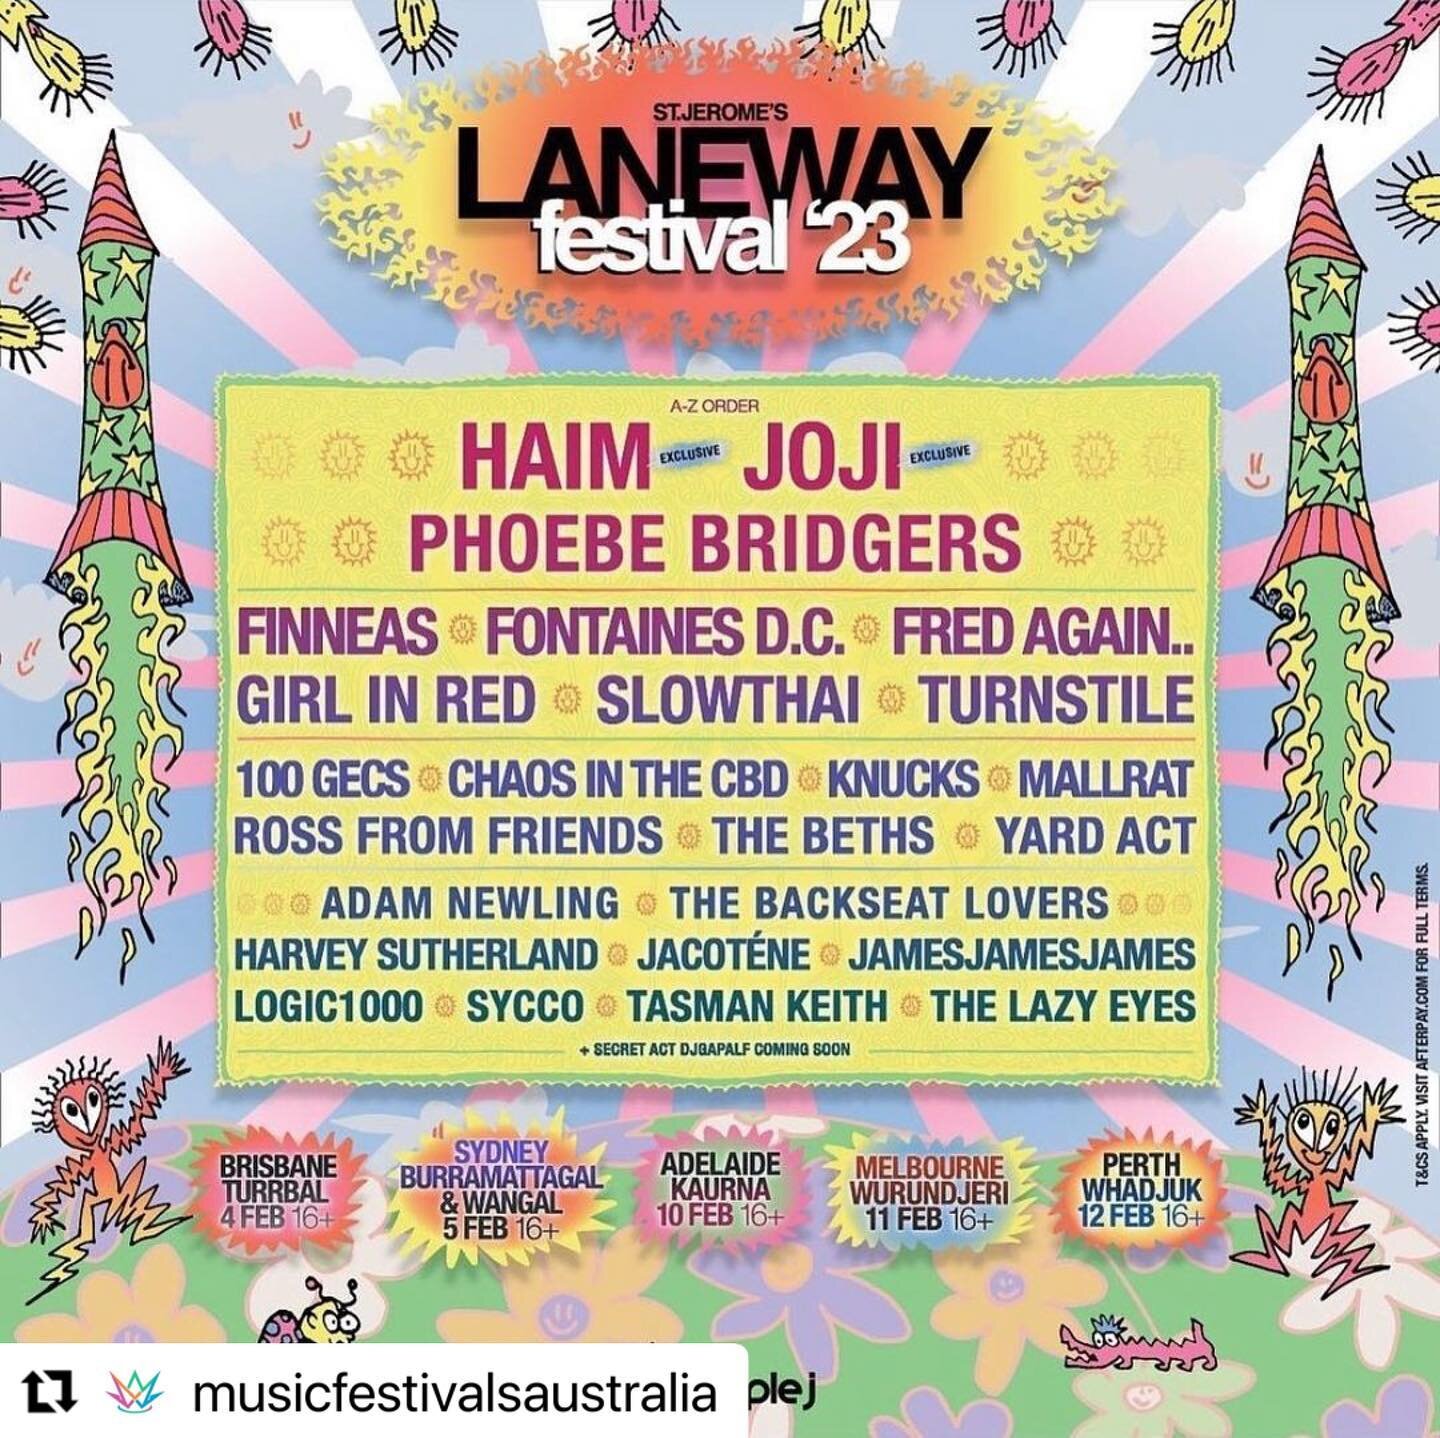 On our way to Sydney 🛫 Laneway ! Come get your glitter on at the Glitter Gypsy will be located at the &quot;Malibu Good Times Bar&quot; see you Sunday from 12-8pm #glittermakeup #glitter #malibu #lanewayfestival @lanewayfest @aeroplaneagency 🤘✨💕